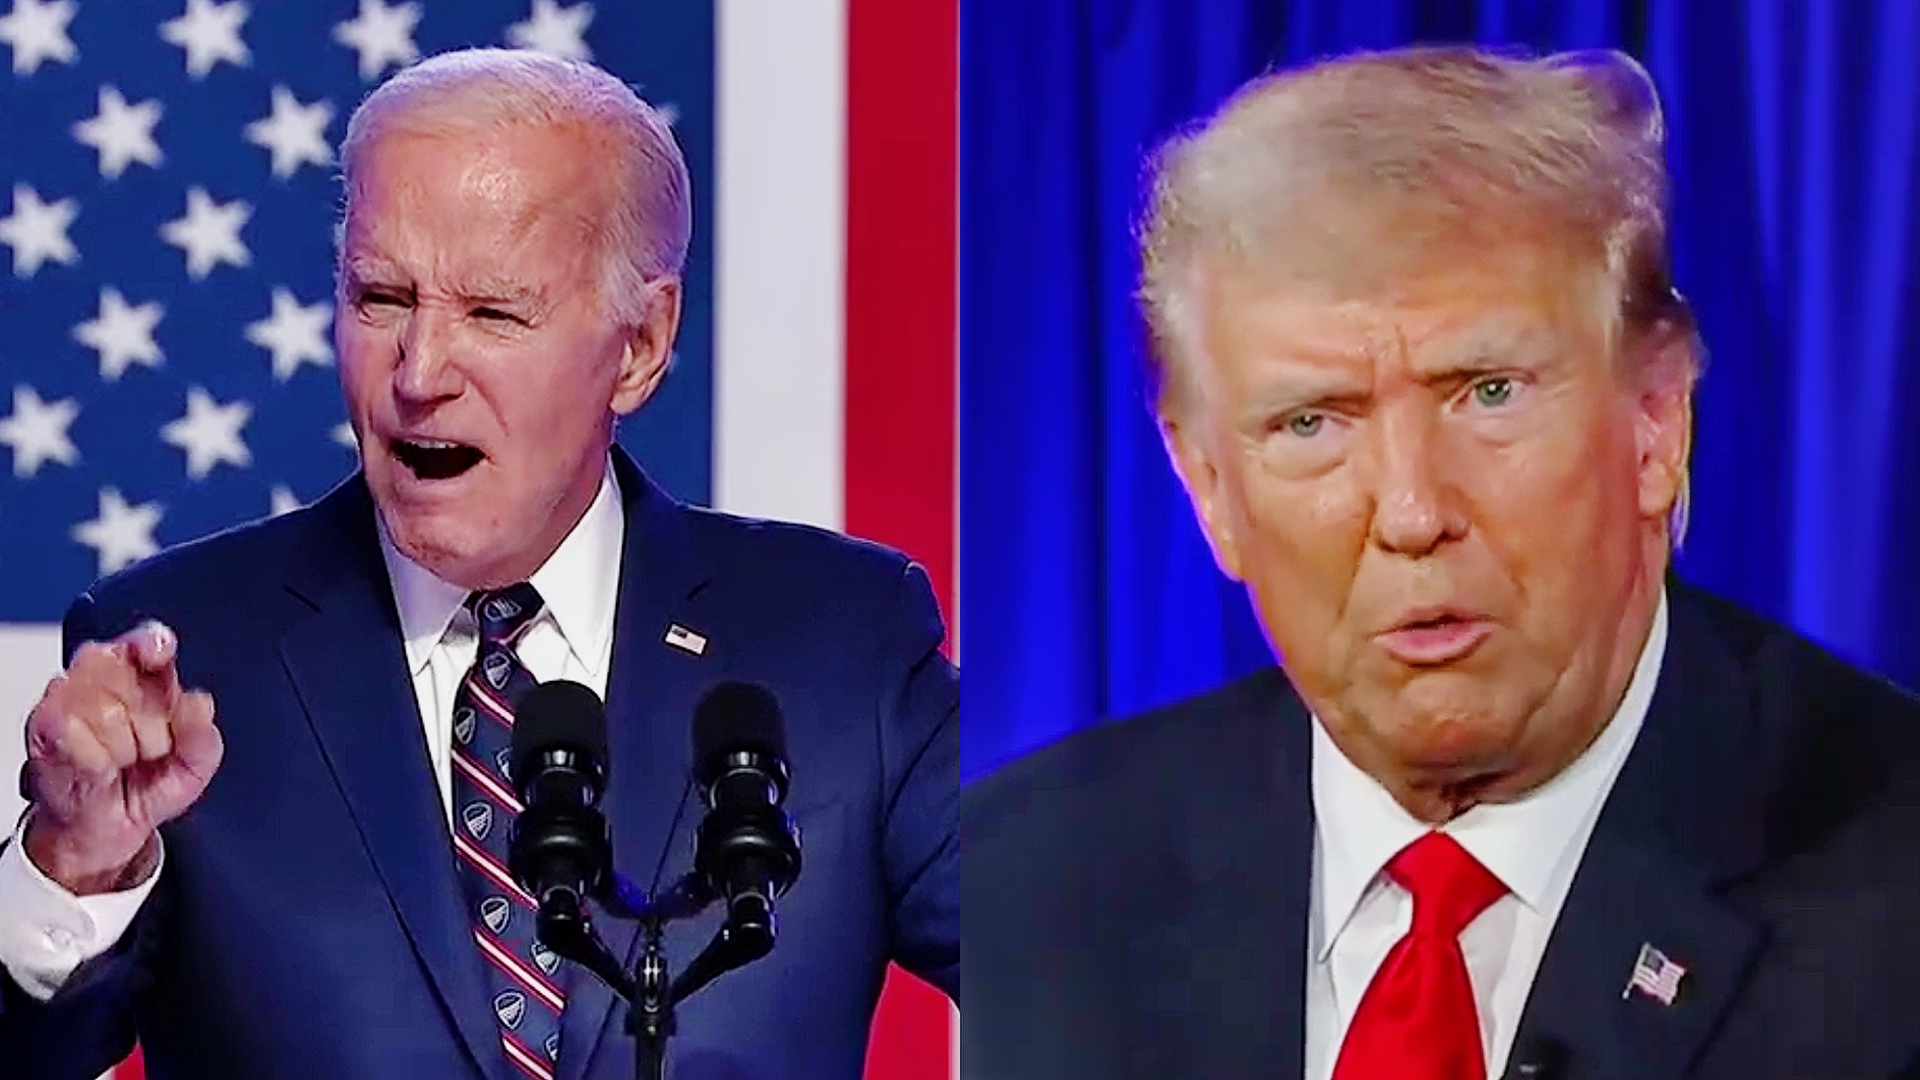 POLL: Biden Takes Over Lead Against Trump In Pennsylvania — Even If RFK and Stein Run